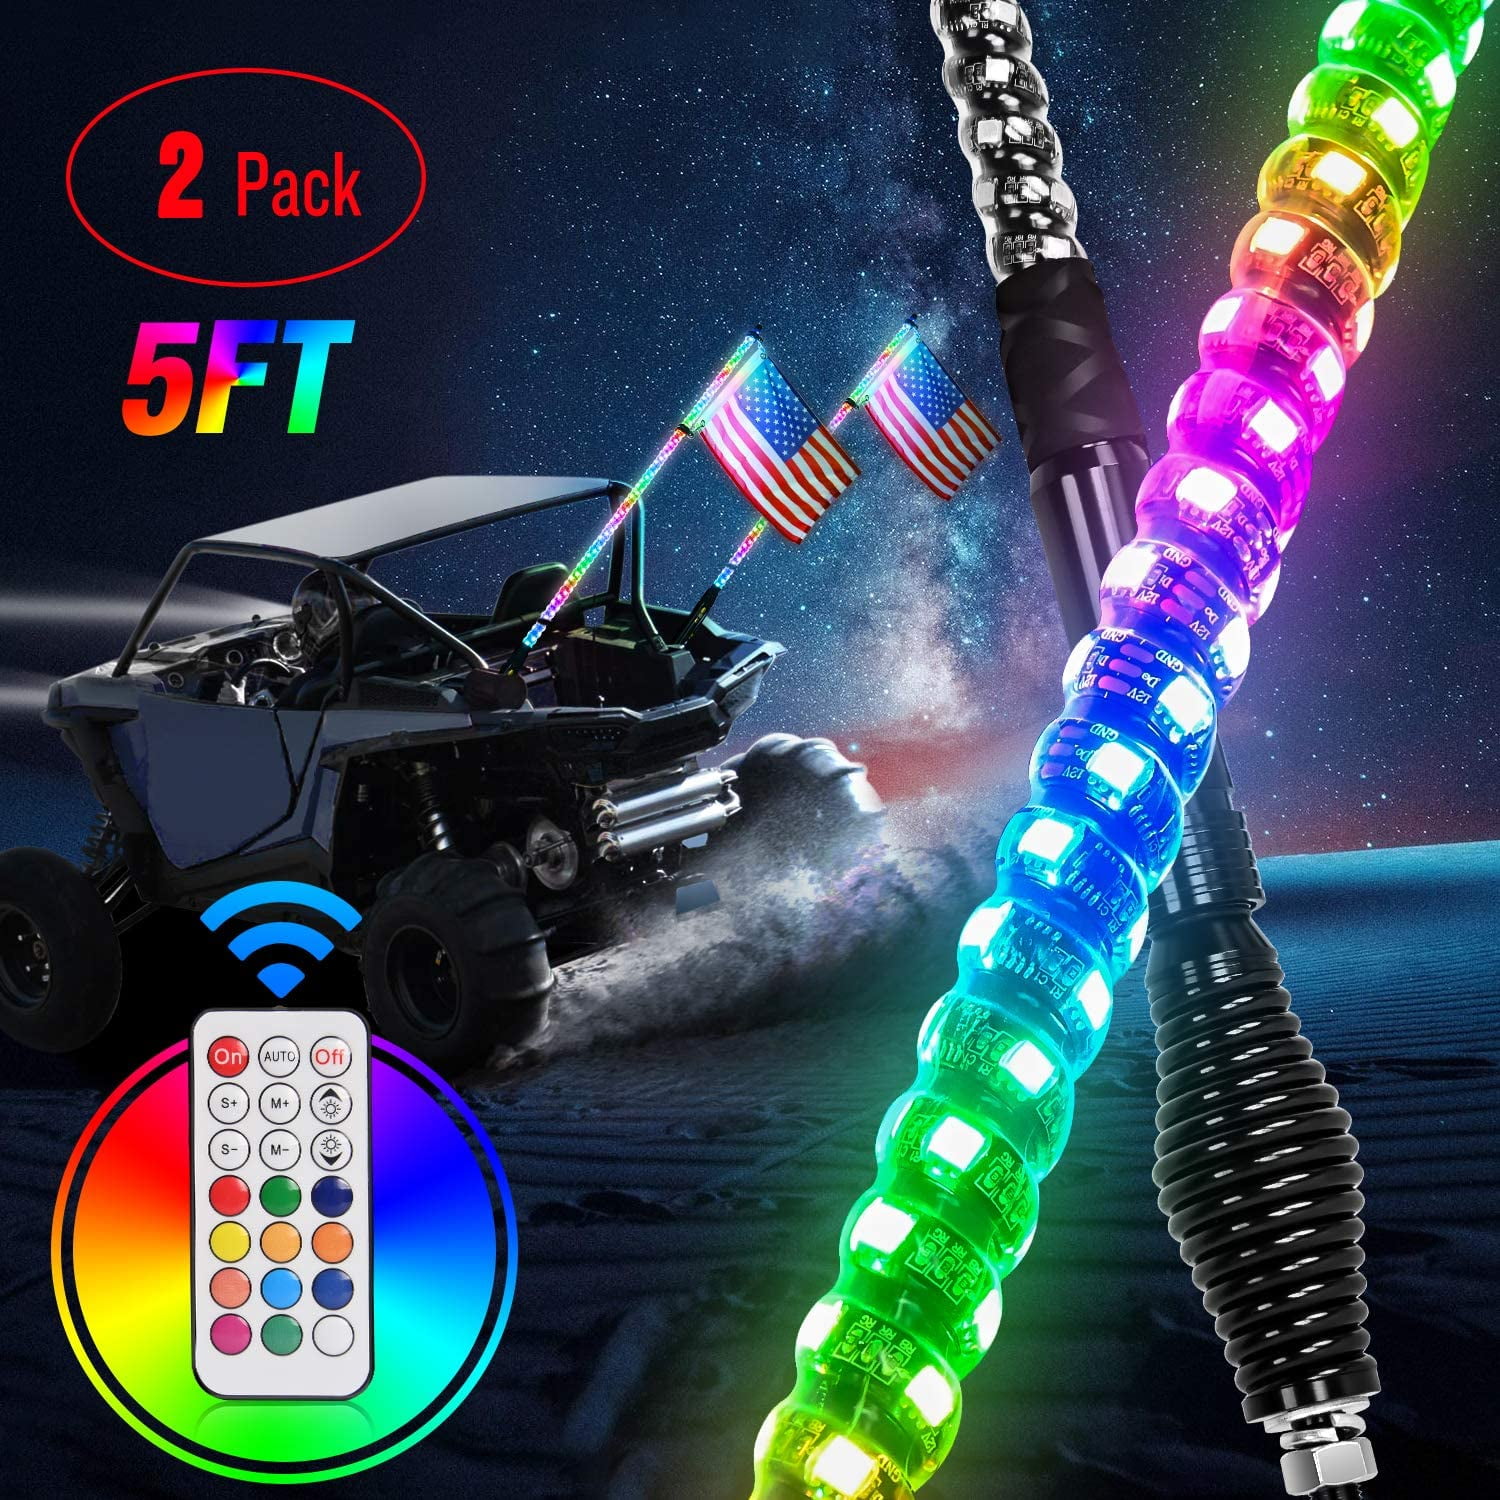 AddSafety 2PCS 5FT RF Remote Controll 360° Sprial LED Whips light With Dancing/Chasing Light LED Antenna Light For Off Road Vehicle ATV UTV RZR Jeep Trucks Dunes. 